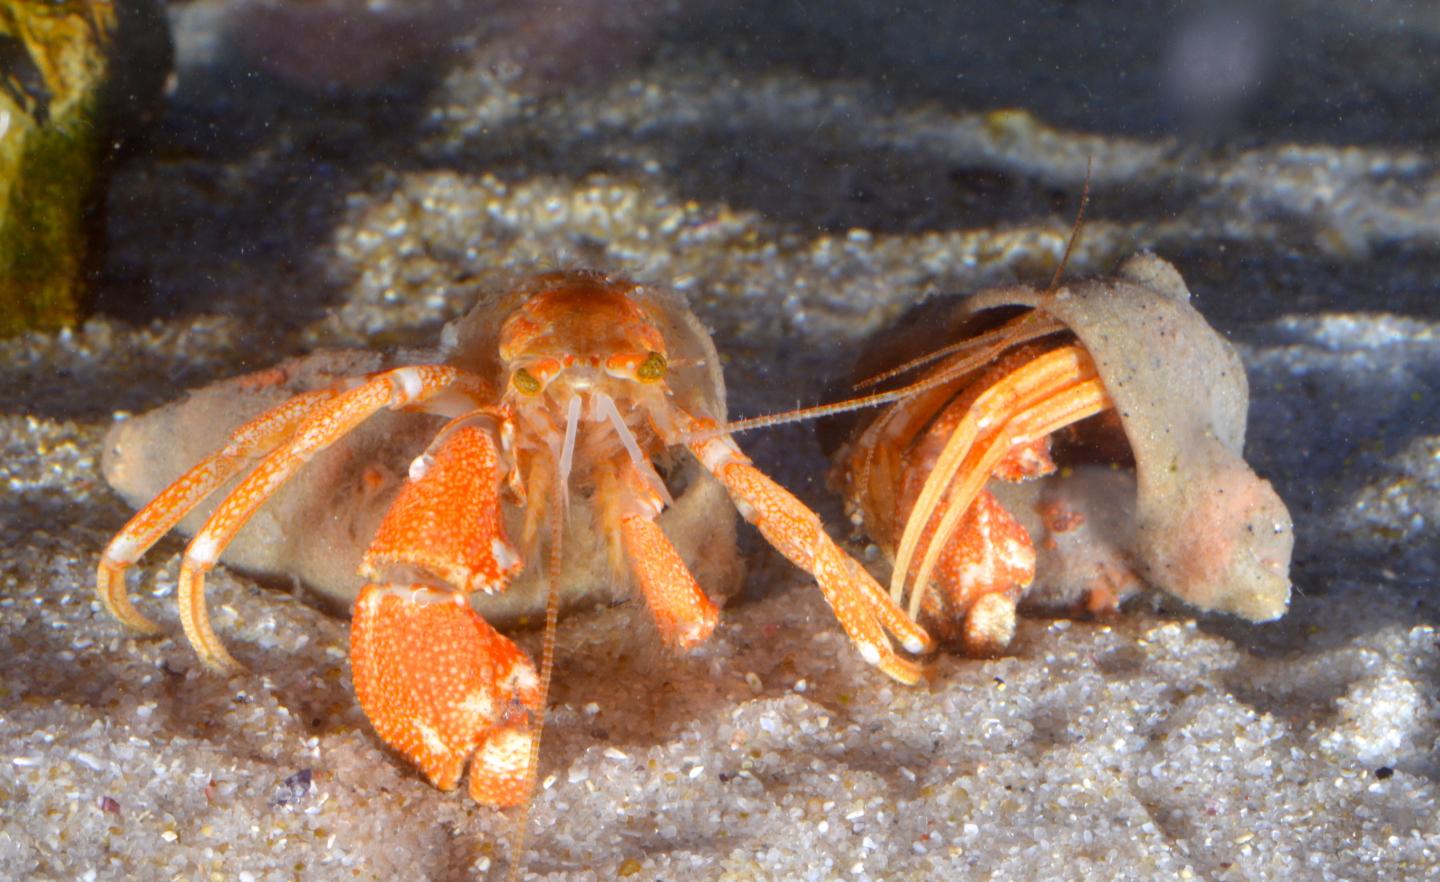 The Green-eyed Hermit Crab